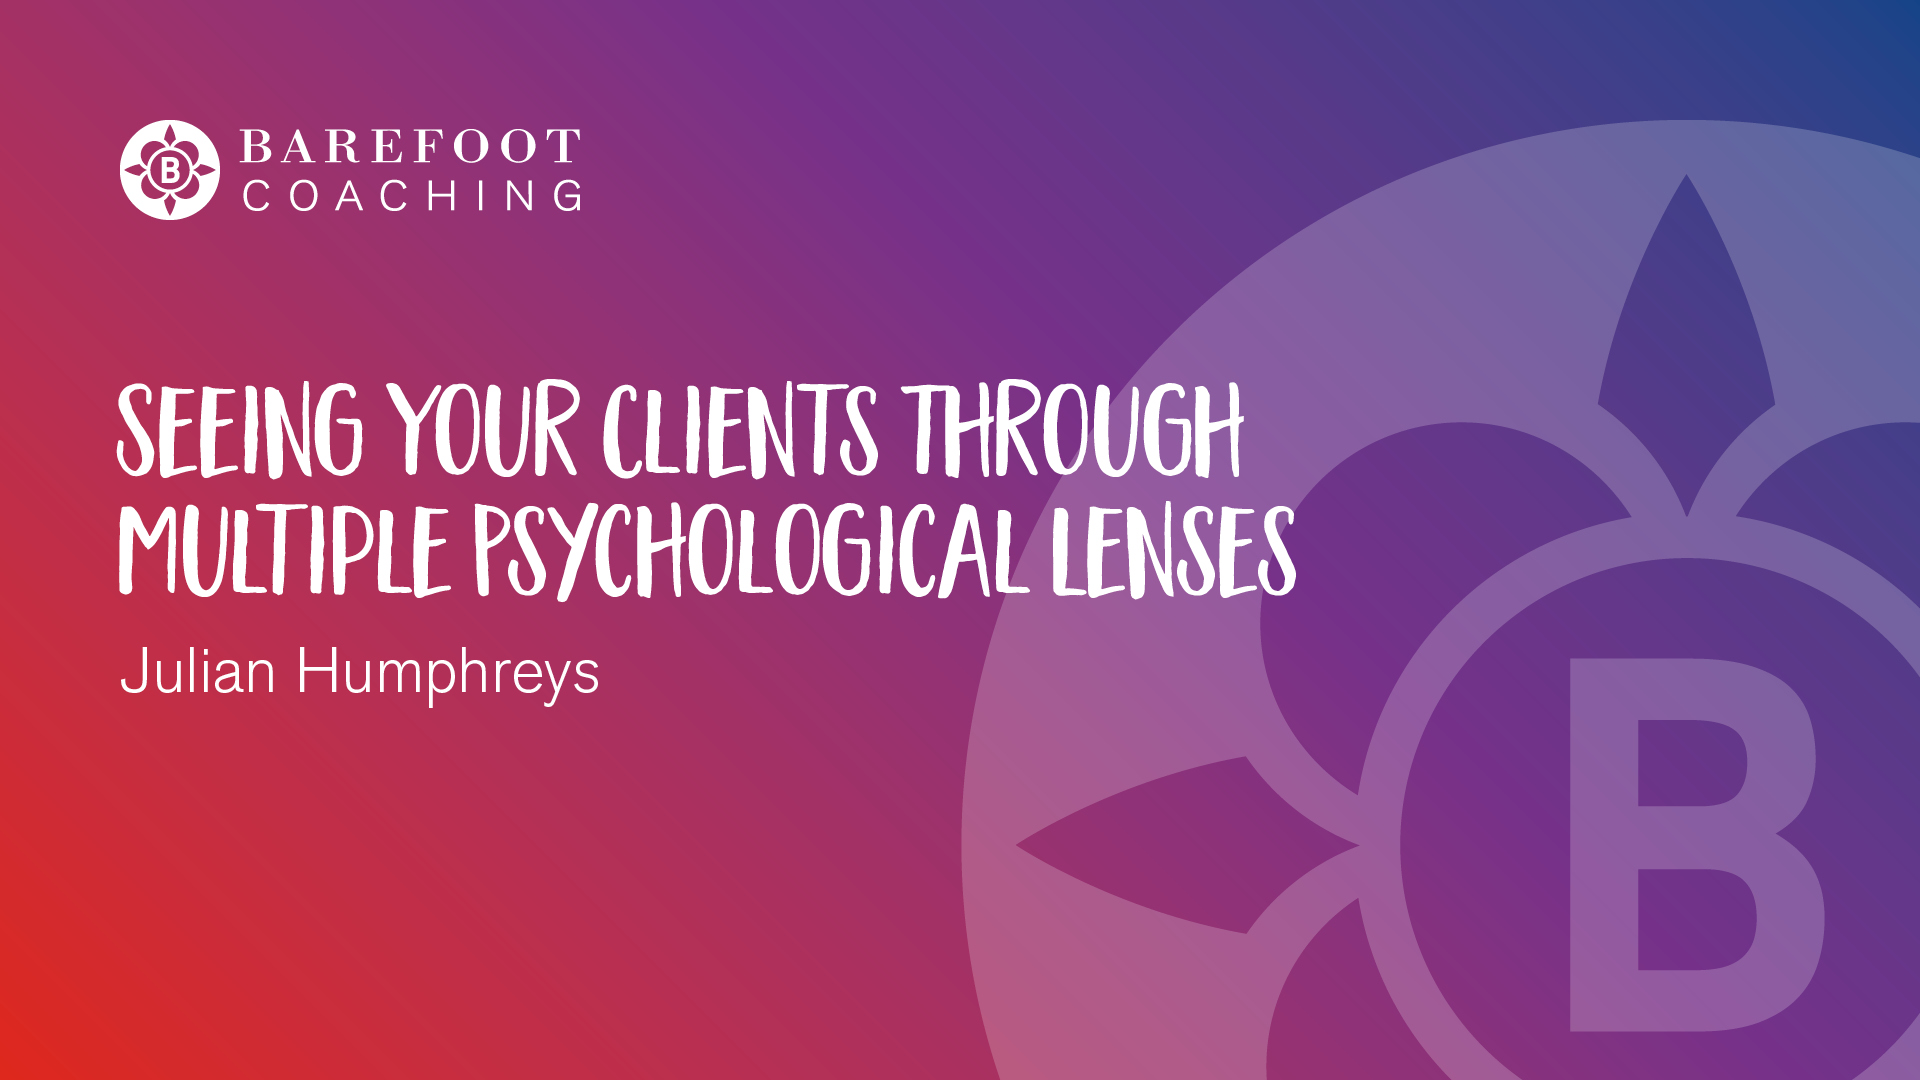 Podcasts & Webinars > Seeing Your Clients Through Multiple Psychological Lenses by Julian Humphreys